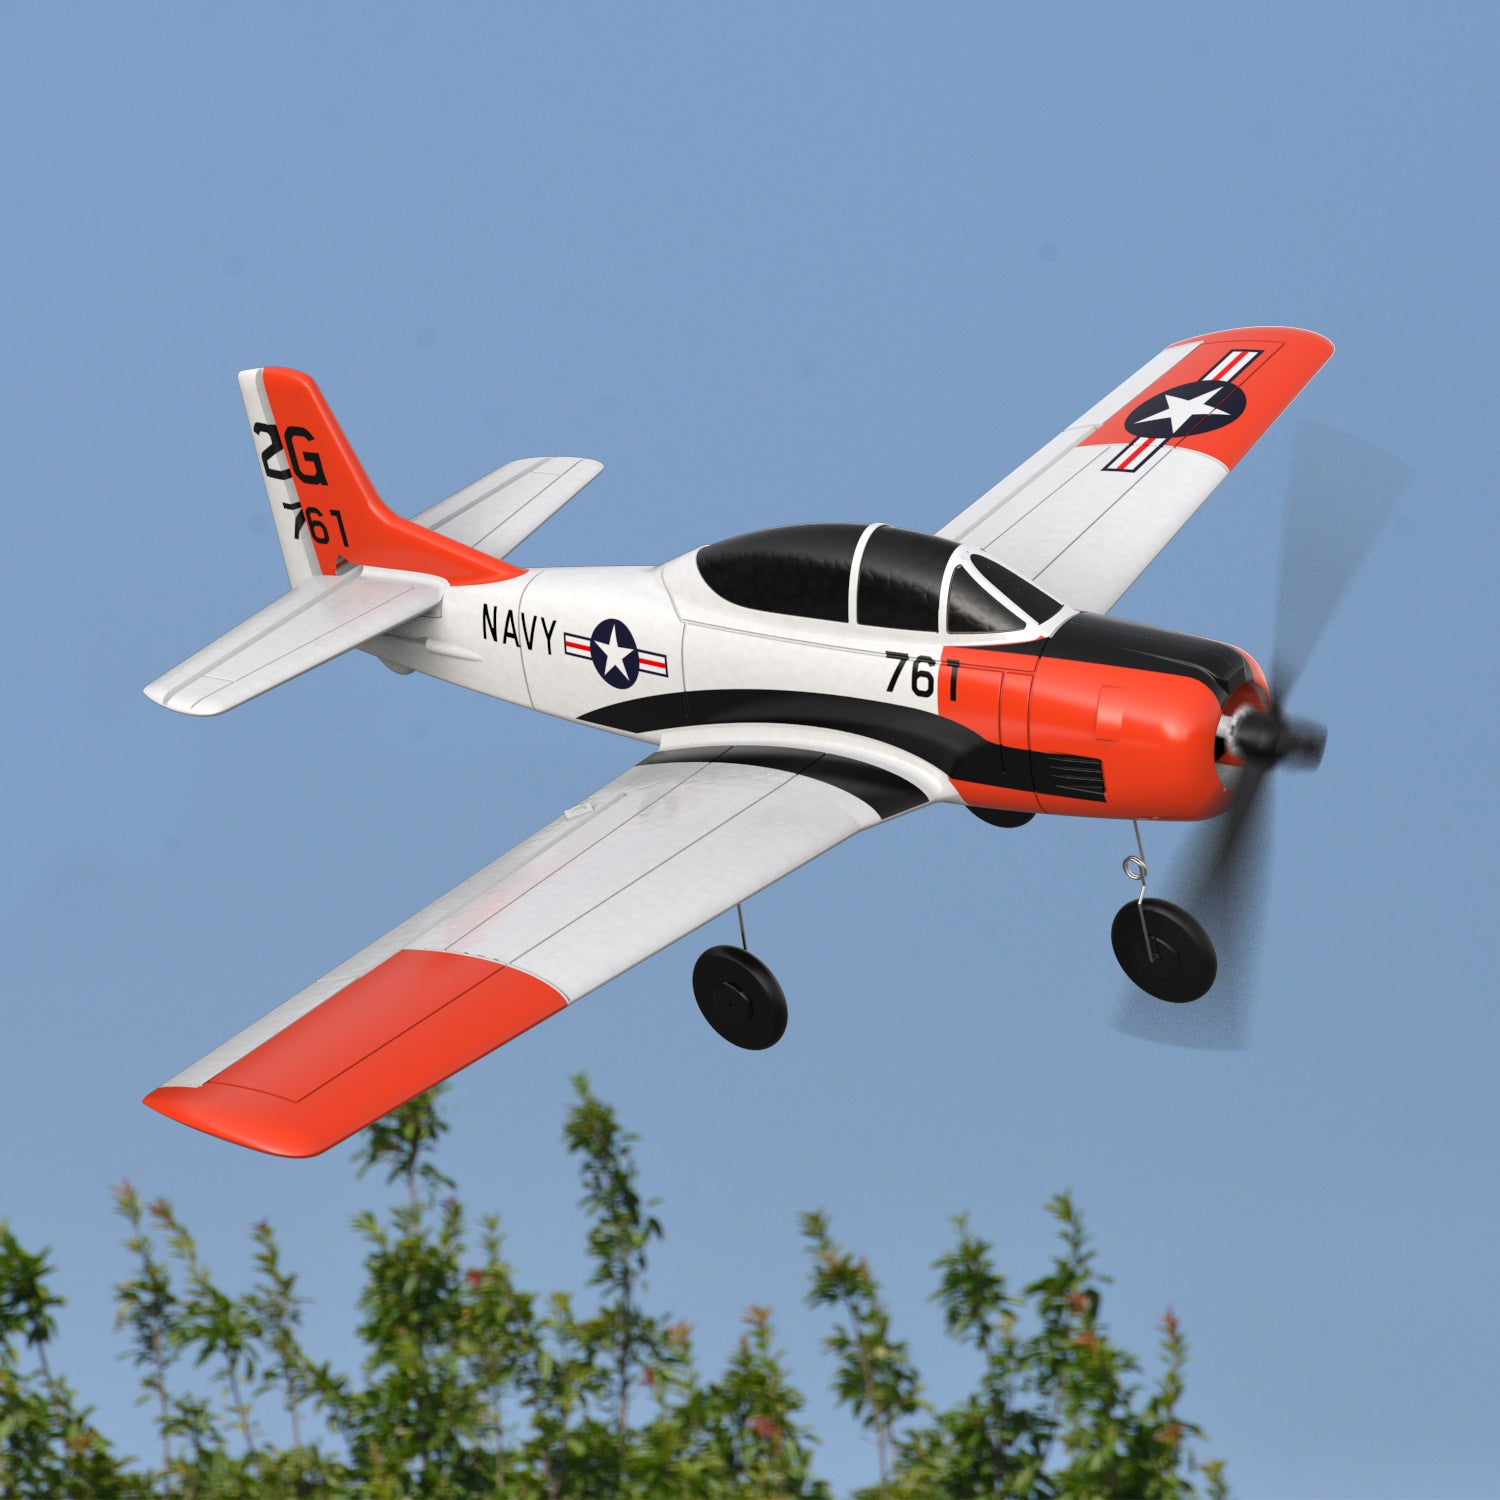 T28 Trojan RC Airplane with Gyro Stabilizer | VOLANTEXRC OFFICIAL SITE